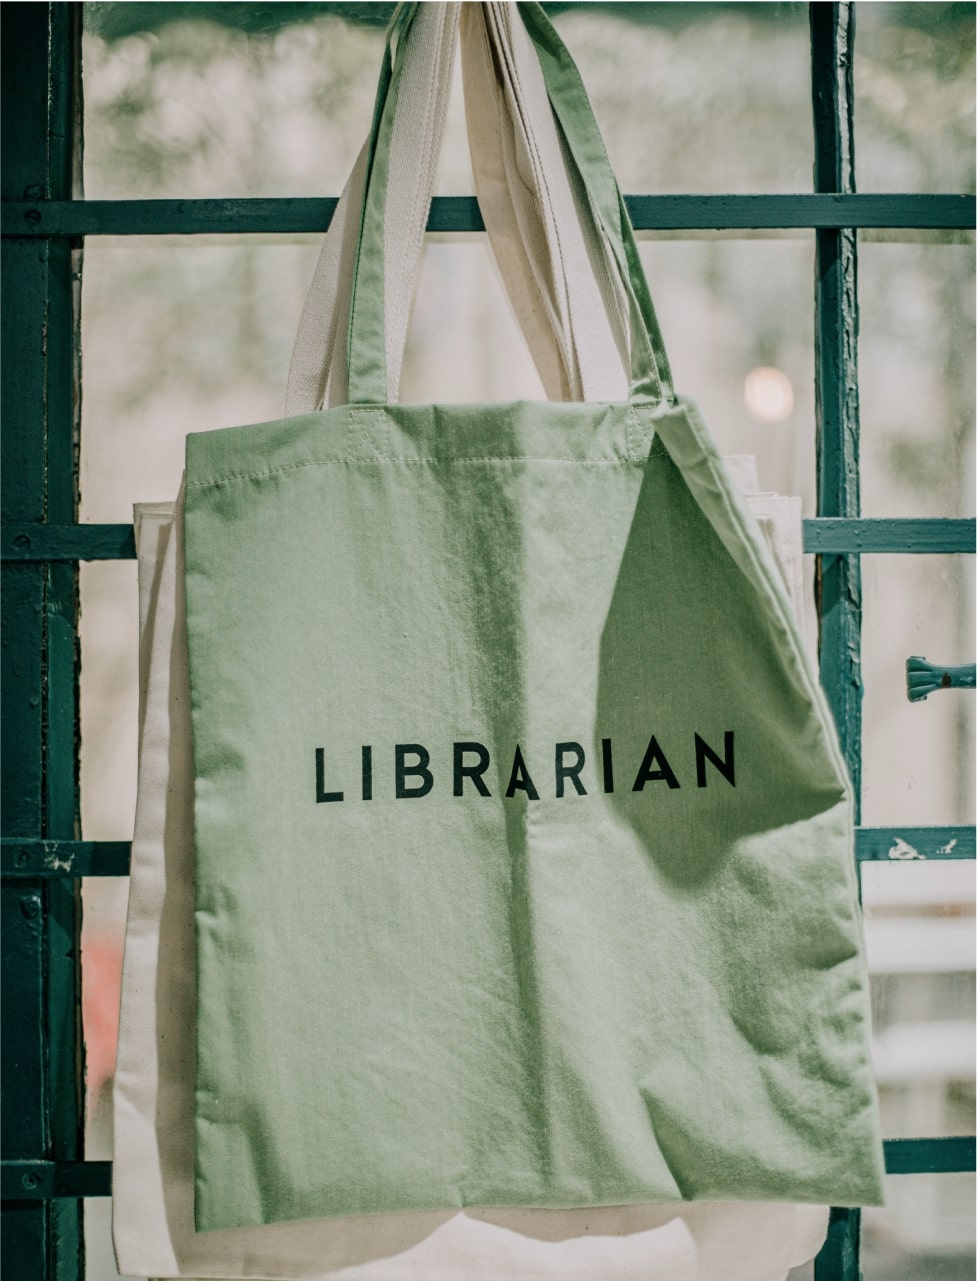 An image of a personalized tote bag in green with the word “Librarian” on it.